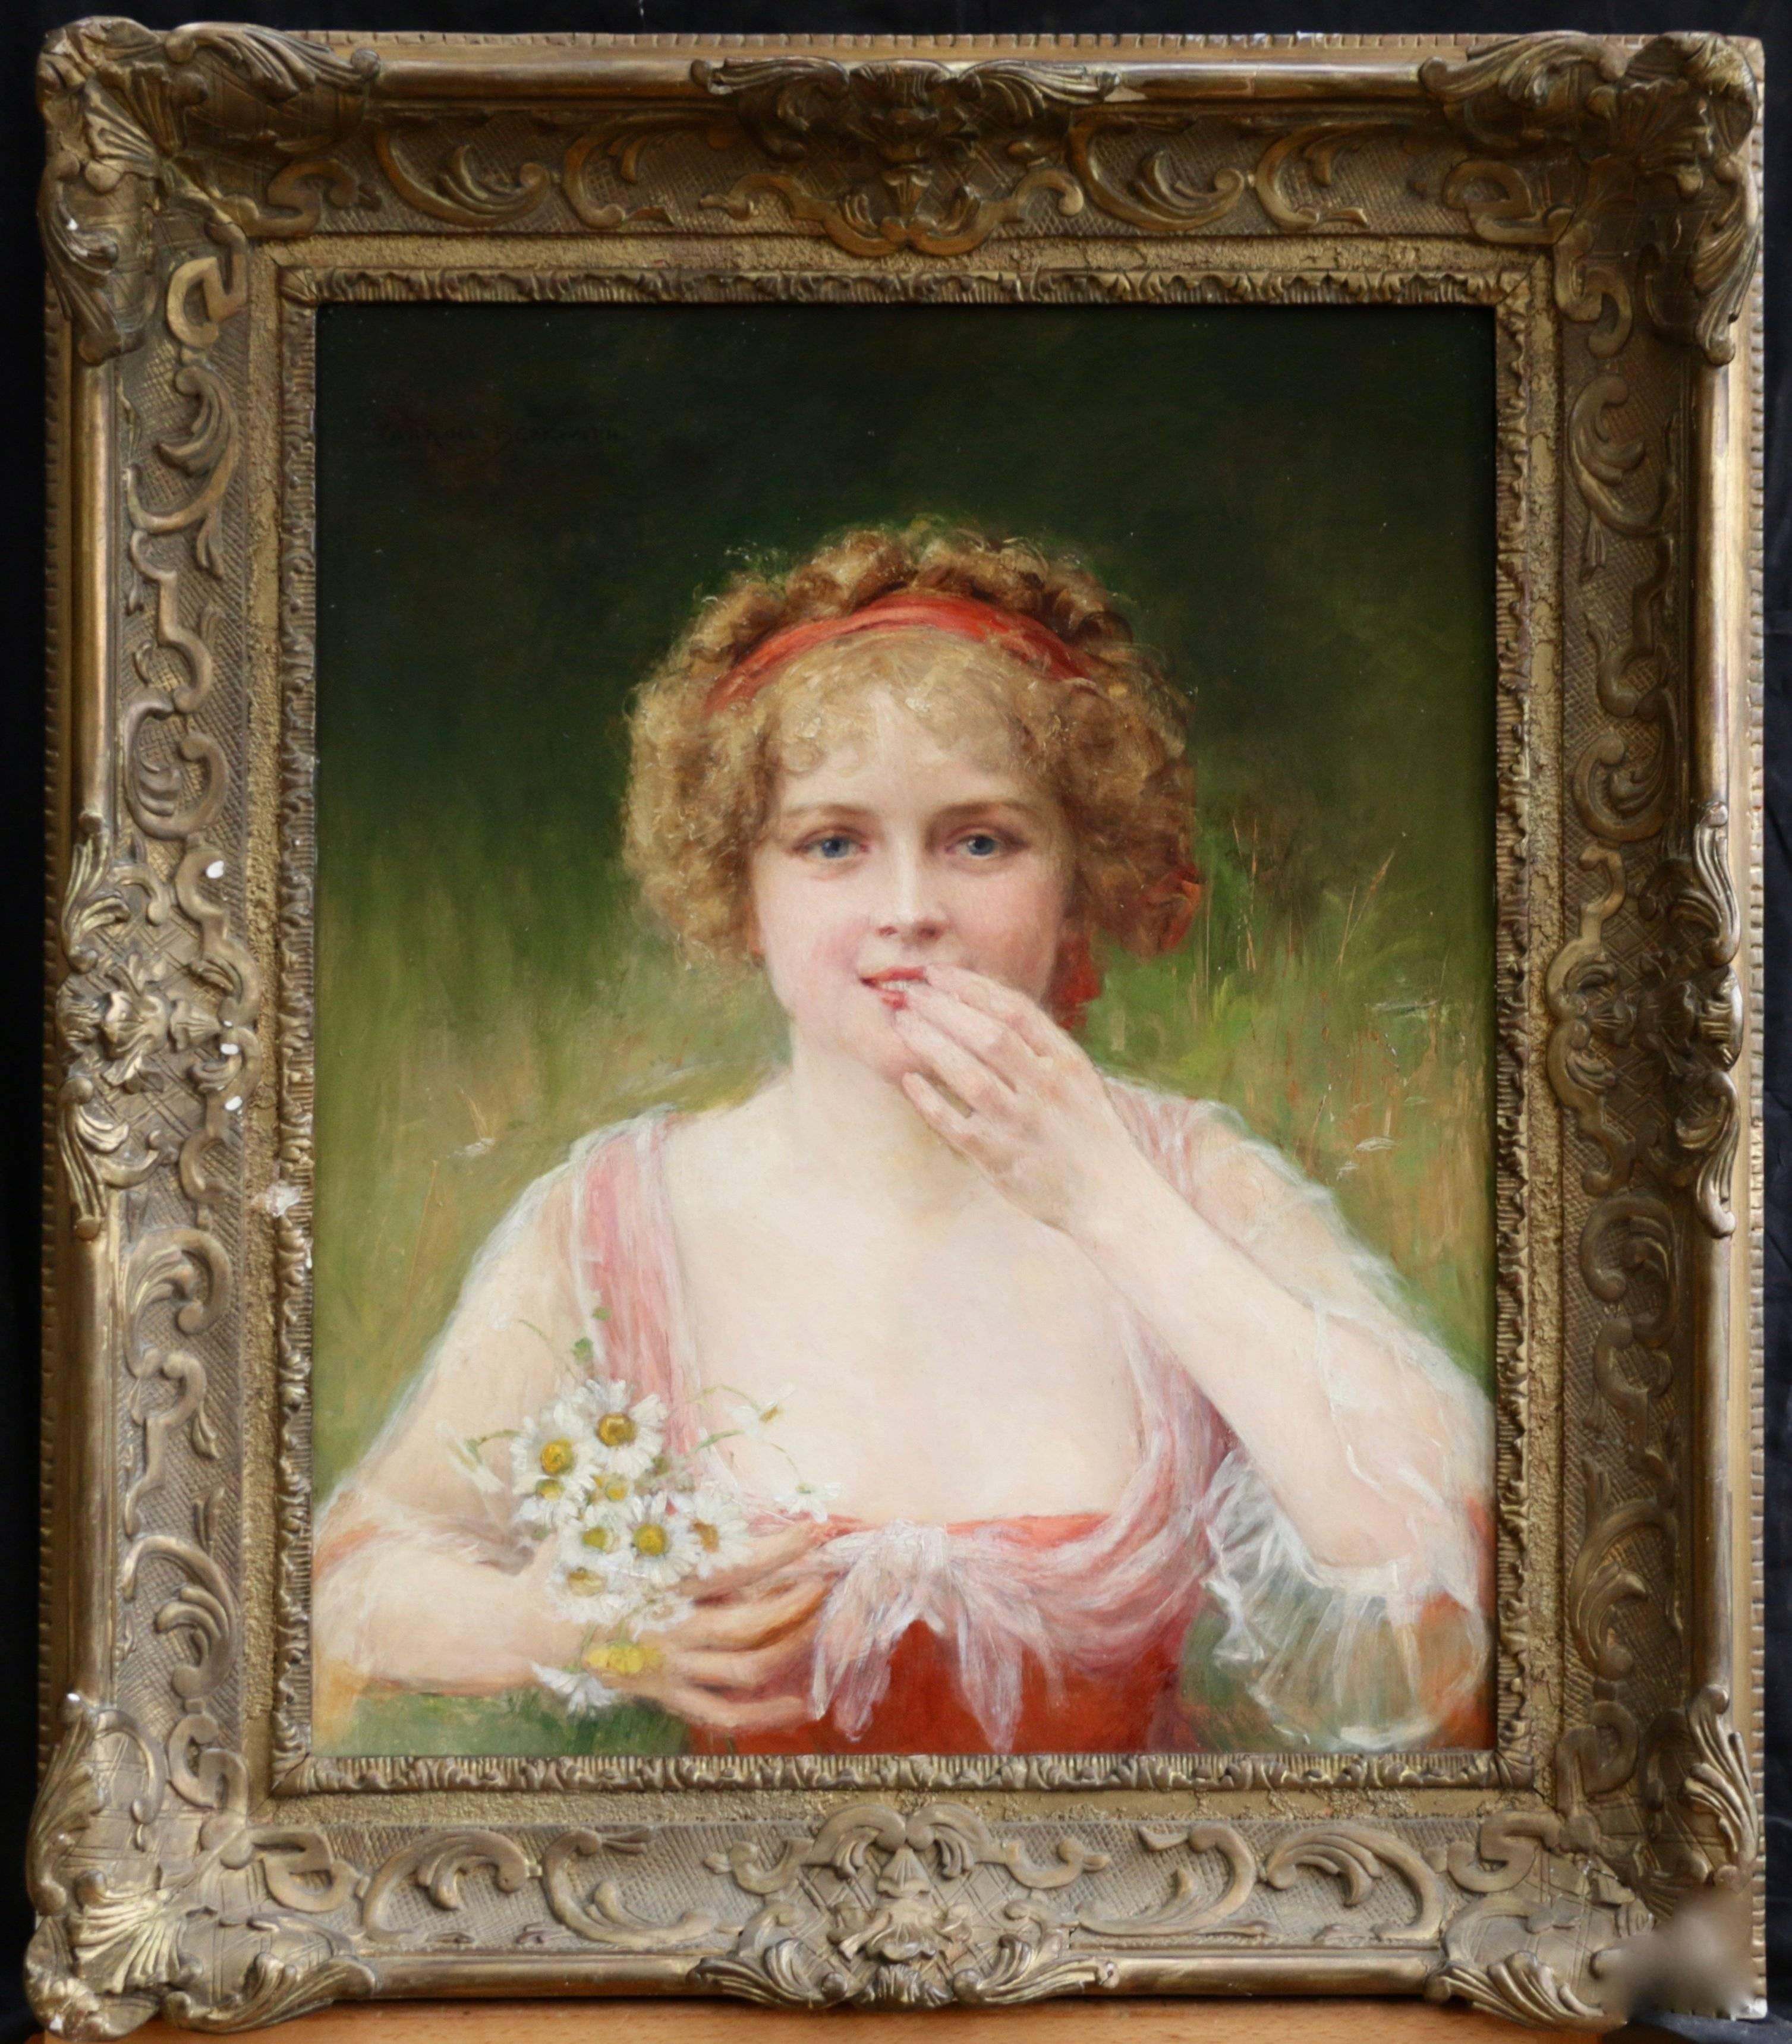 Surprised! - 19th Century Oil, Portrait of Young Girl & Flowers by J C Beckwith - Painting by James Carroll Beckwith